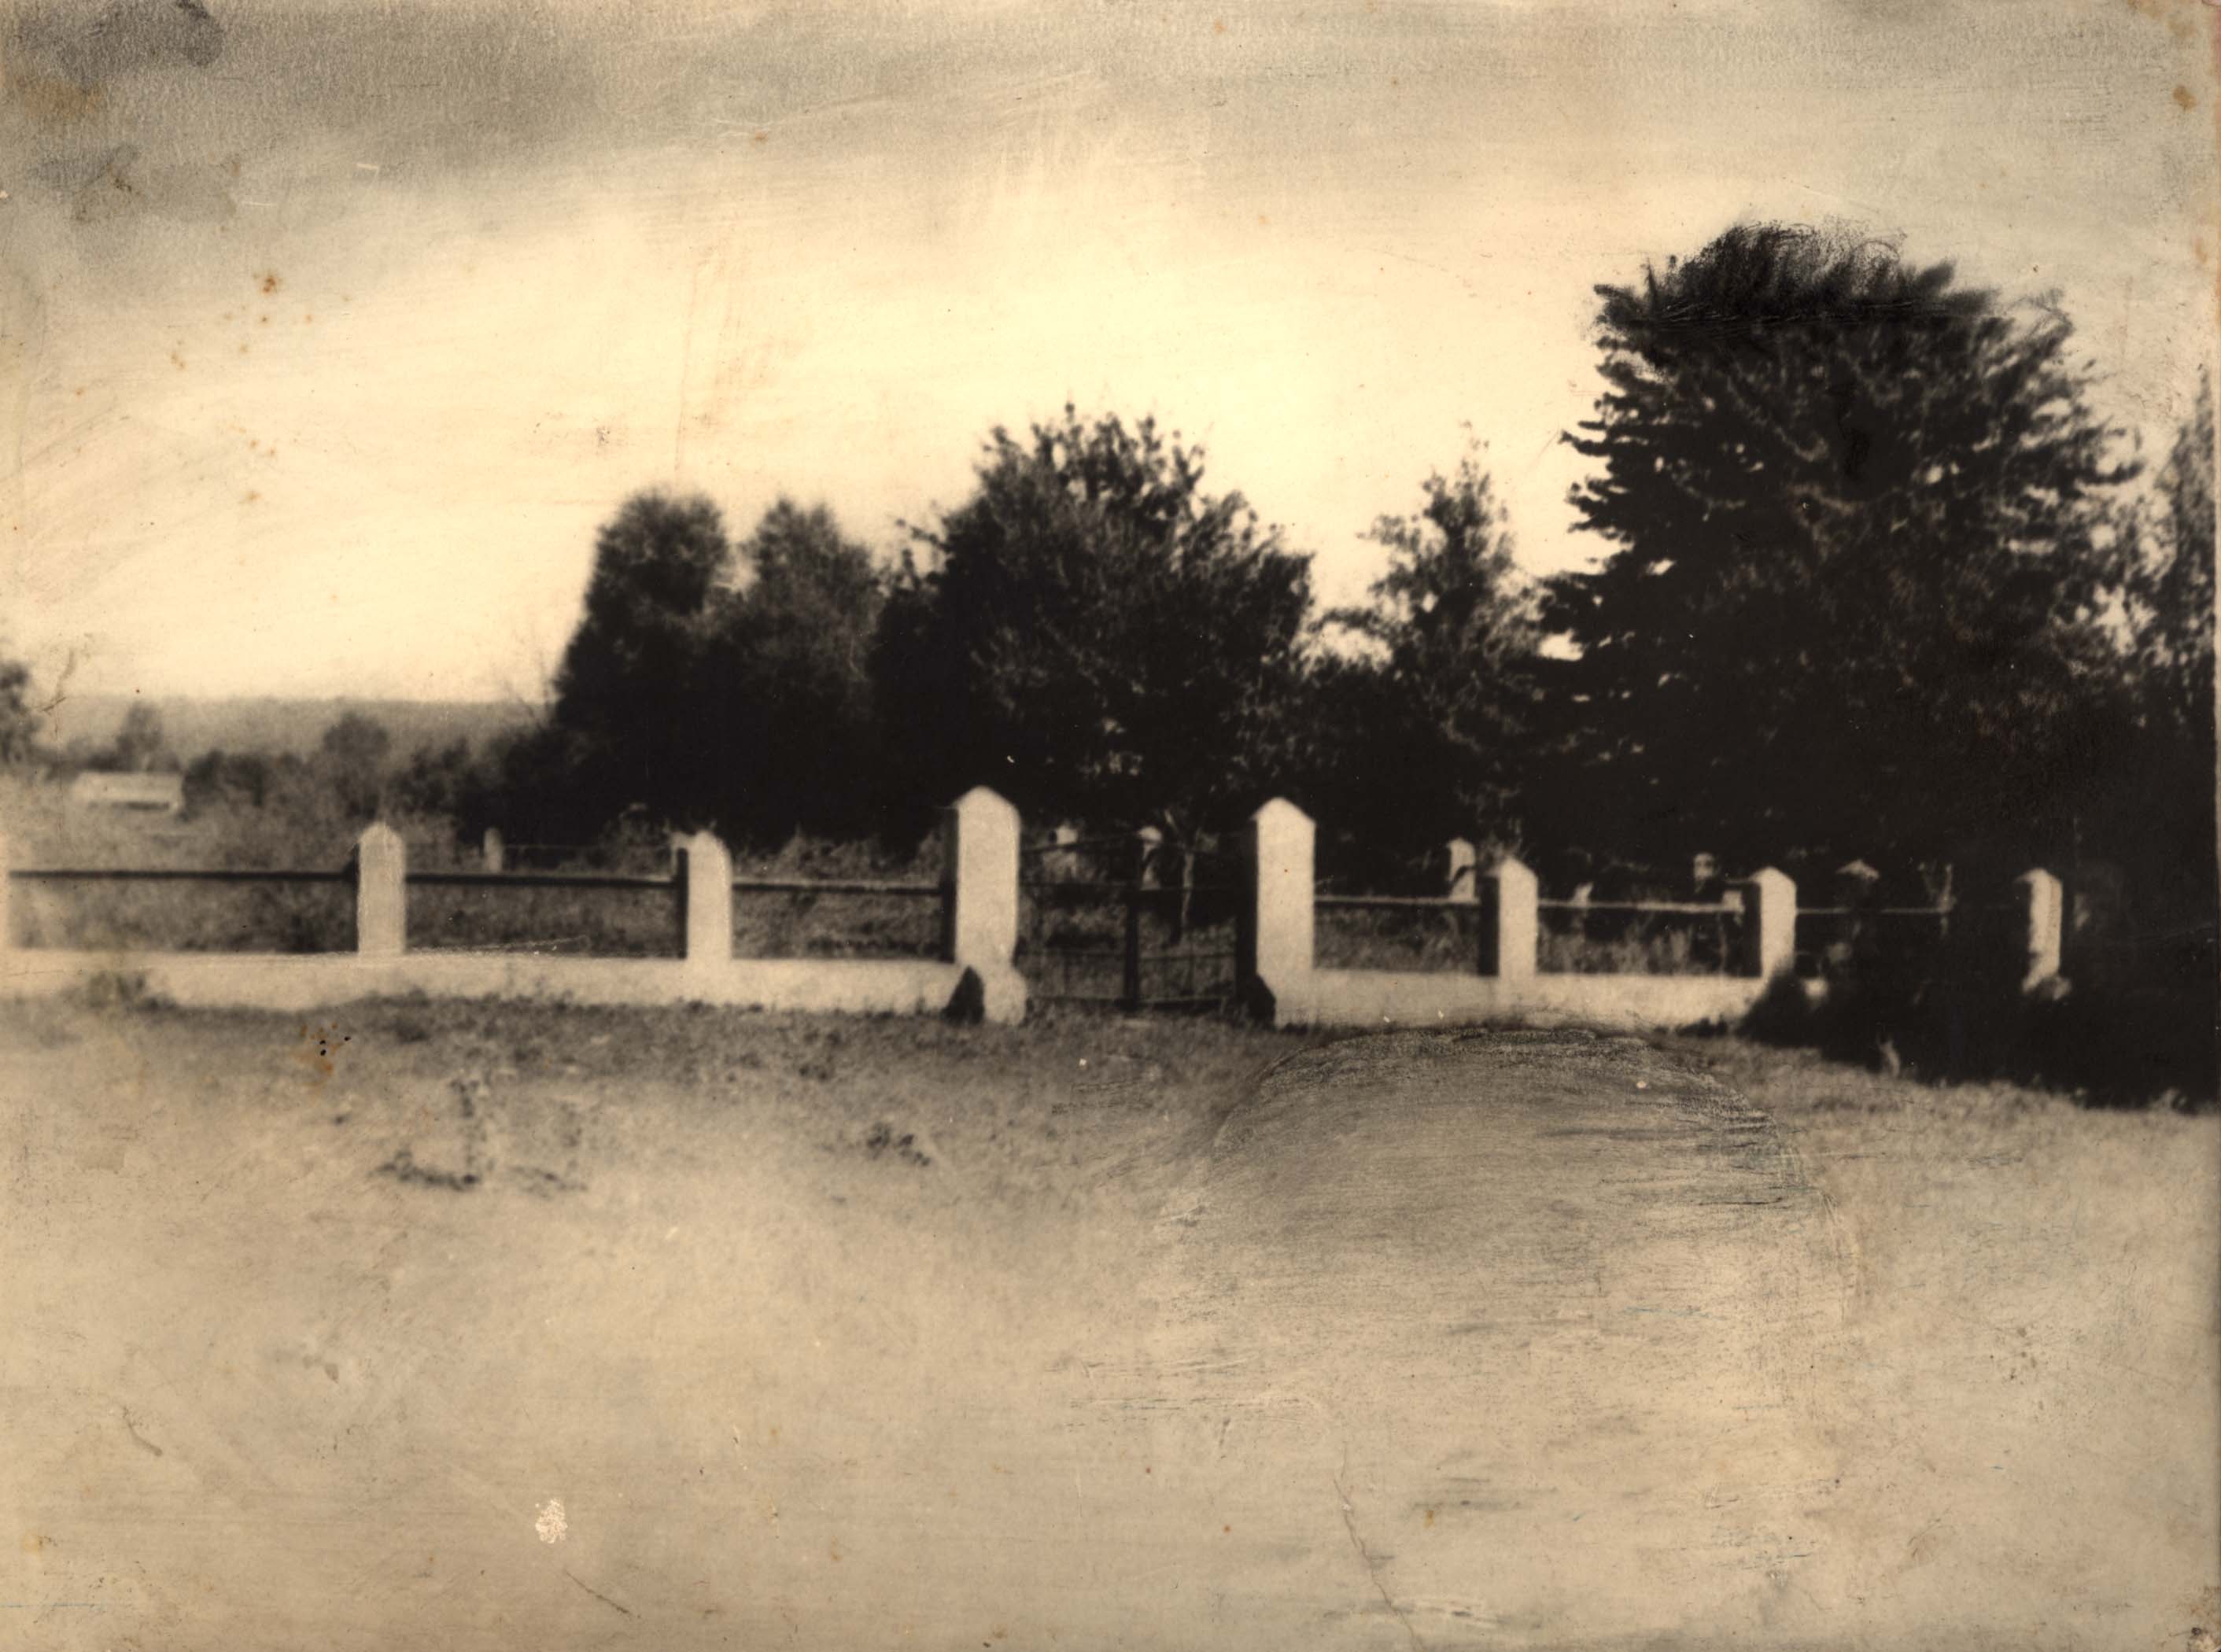 Fenced off murder site at the Jewish cemetery. Apparently in the late 1940s or early 1950s